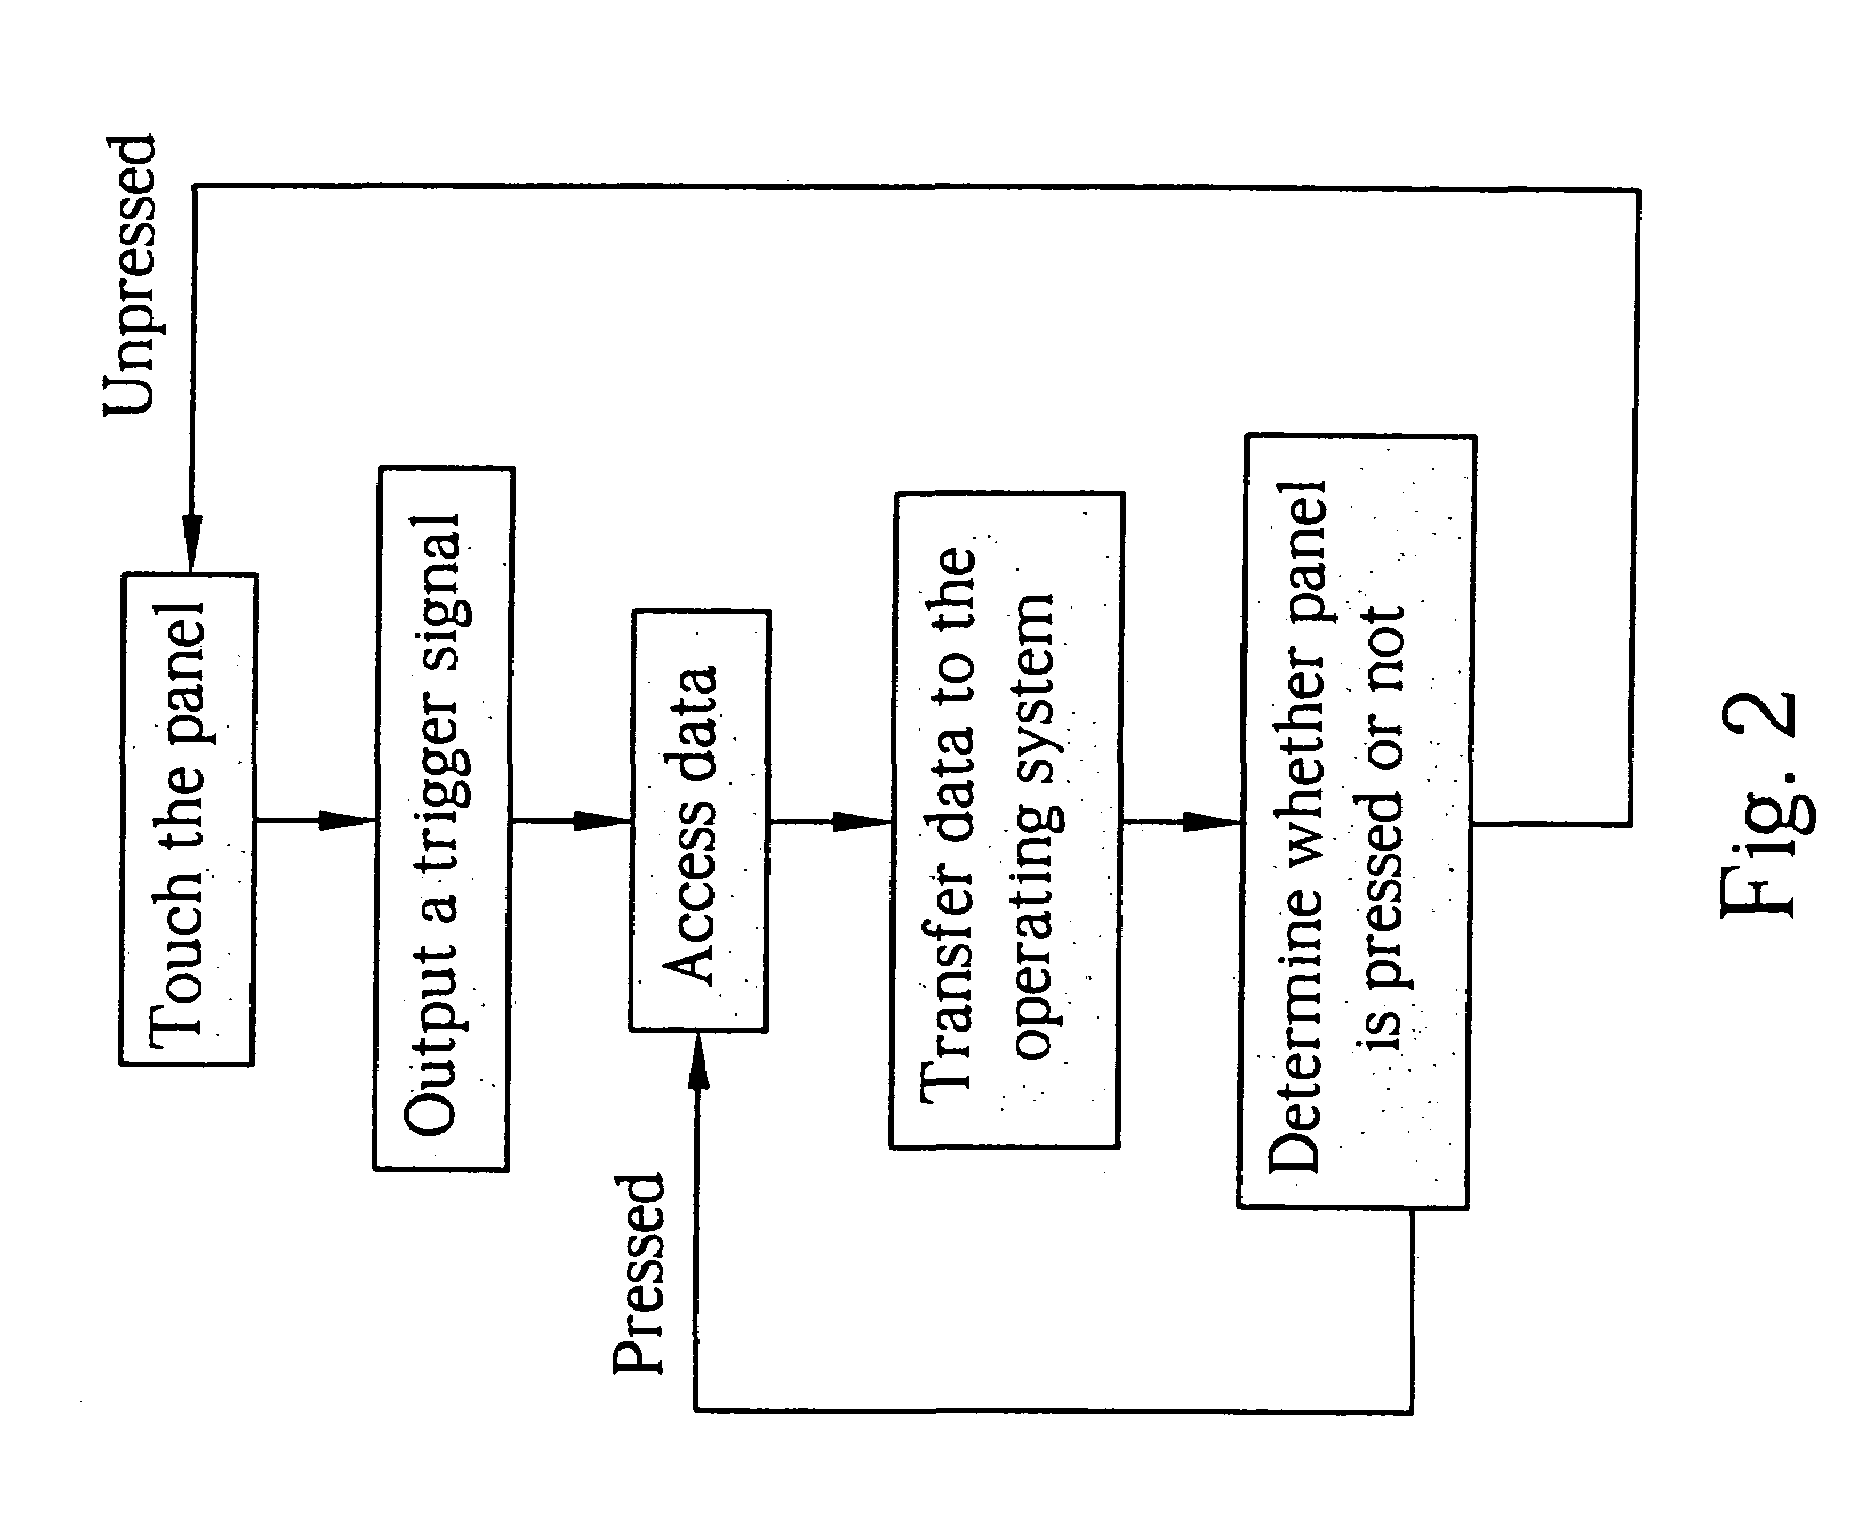 Method and apparatus for avoiding pressing inaccuracies on a touch panel